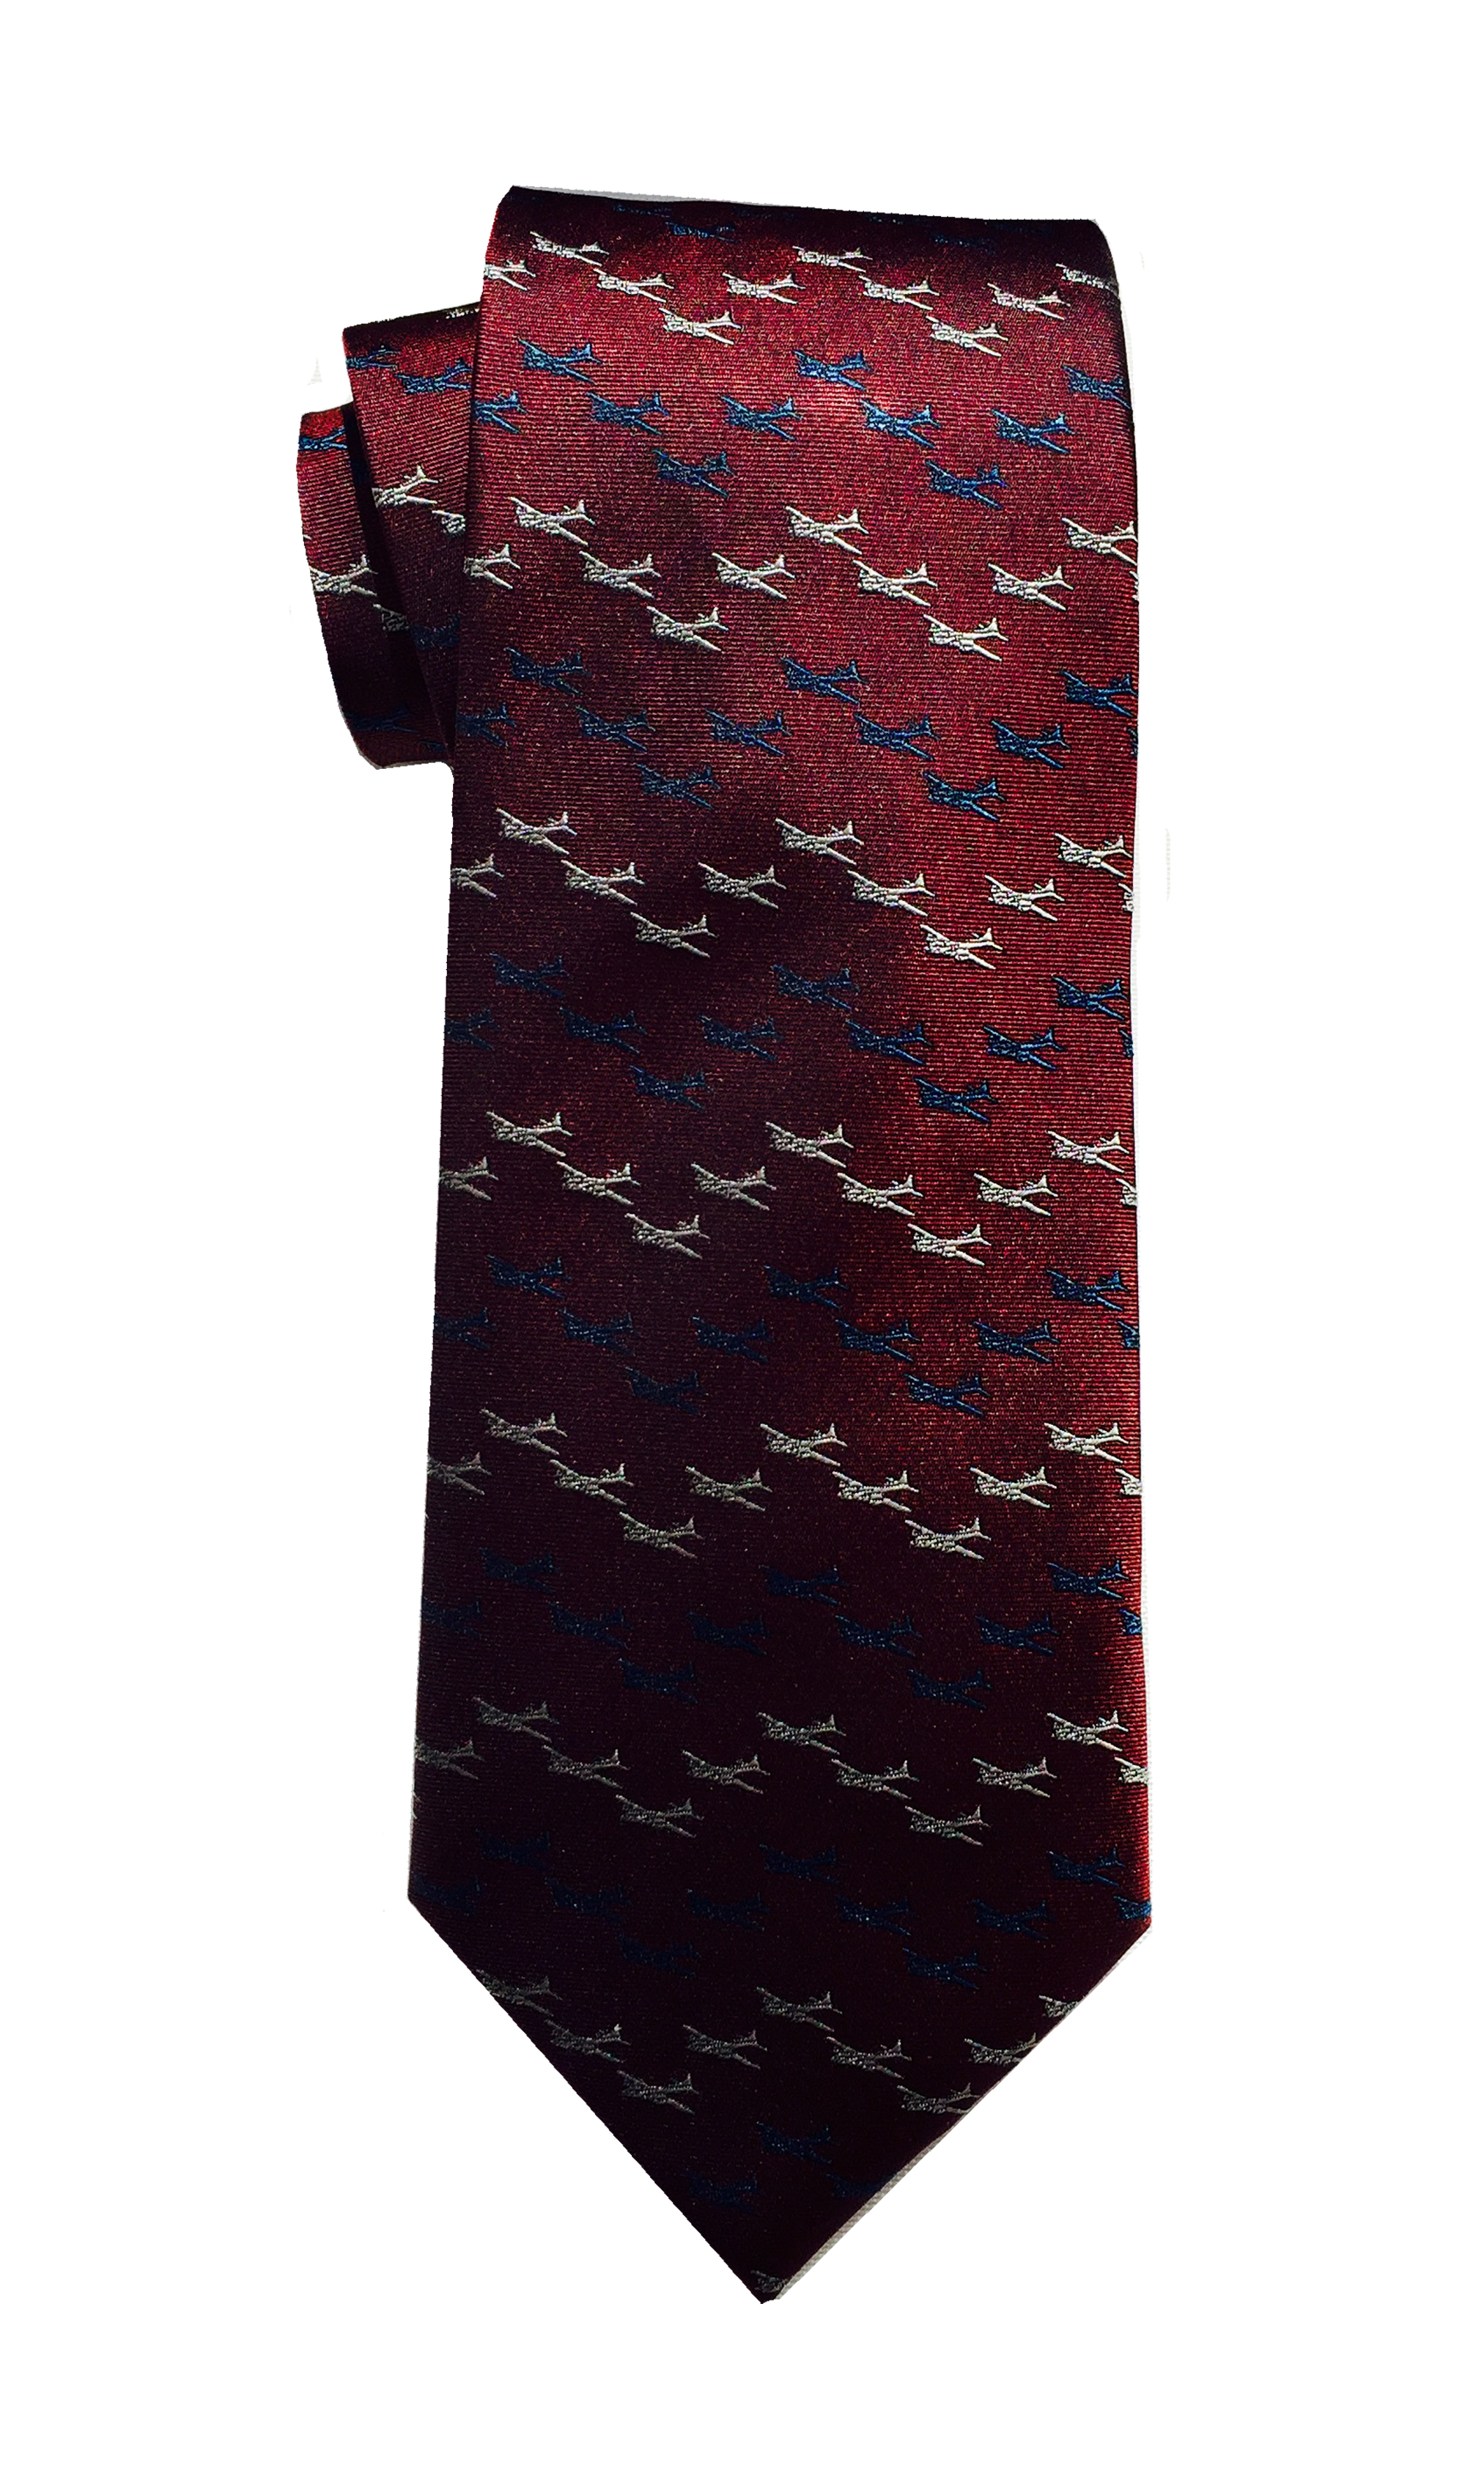 B-17 Flying Fortress airplane tie in claret